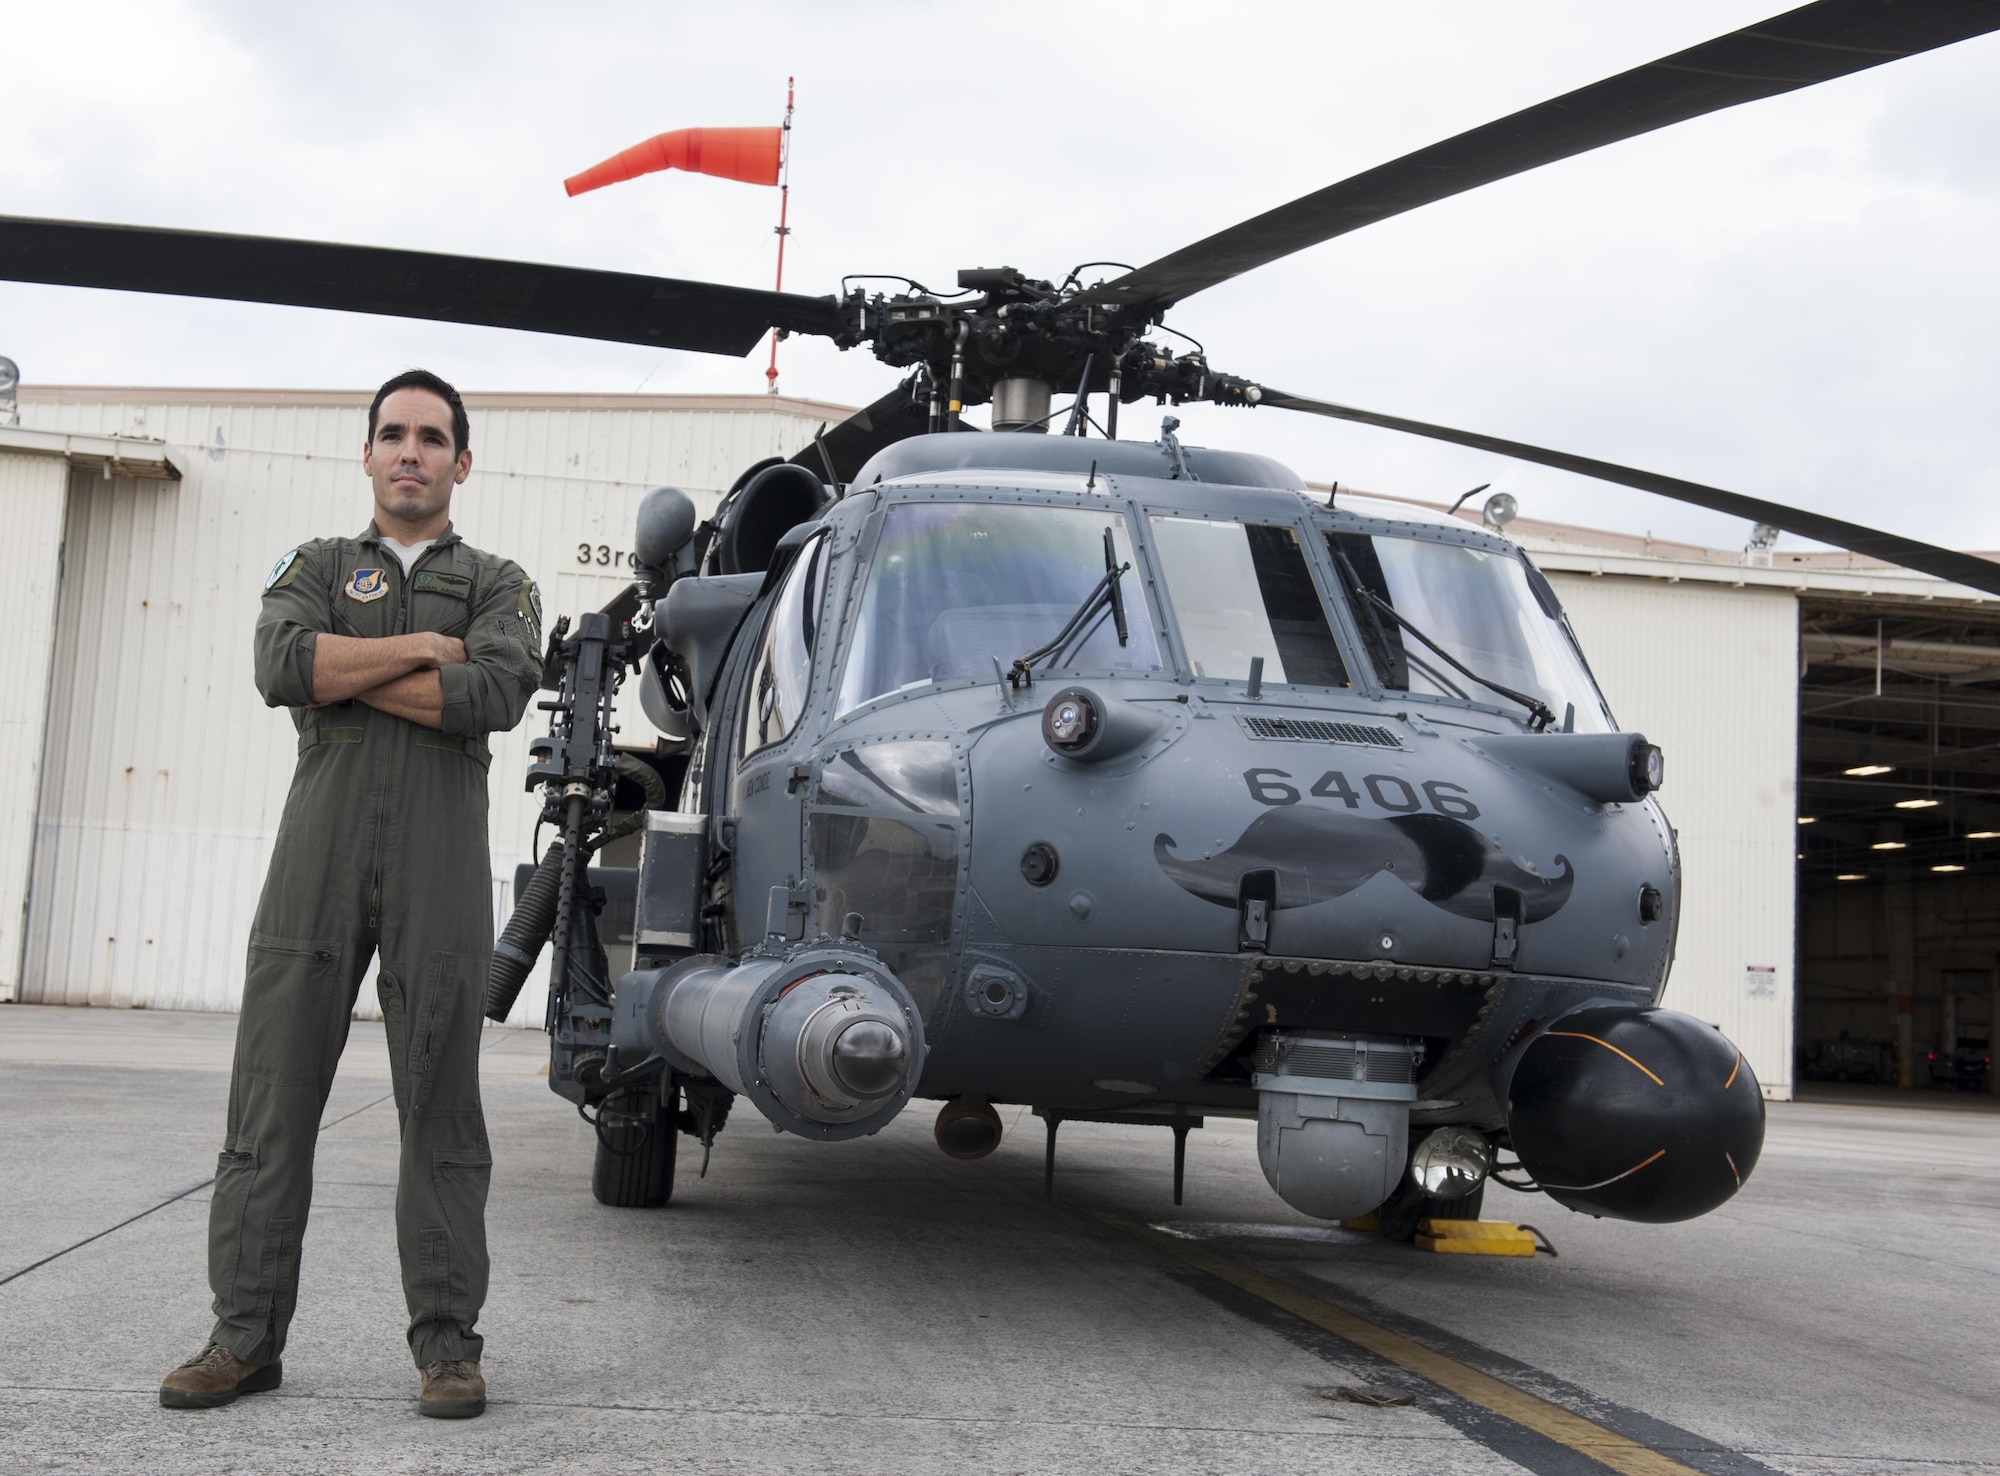 U.S. Air Force Maj. Anibal Aguirre, 33rd Rescue Squadron weapons and tactics officer, piloted one of the HH-60G Pave Hawks during the rescue of five MV-22 Osprey crewmembers Dec. 13, 2016. Members of the 33rd RQS participated in the successful rescue of the Marines alongside members of the 31st RQS, Japan Air Self-Defense Force and the Japan Coast Guard following a shallow water landing off the coast of Okinawa near Camp Schwab. (U.S. Air Force photo by Senior Airman Lynette M. Rolen/Released)